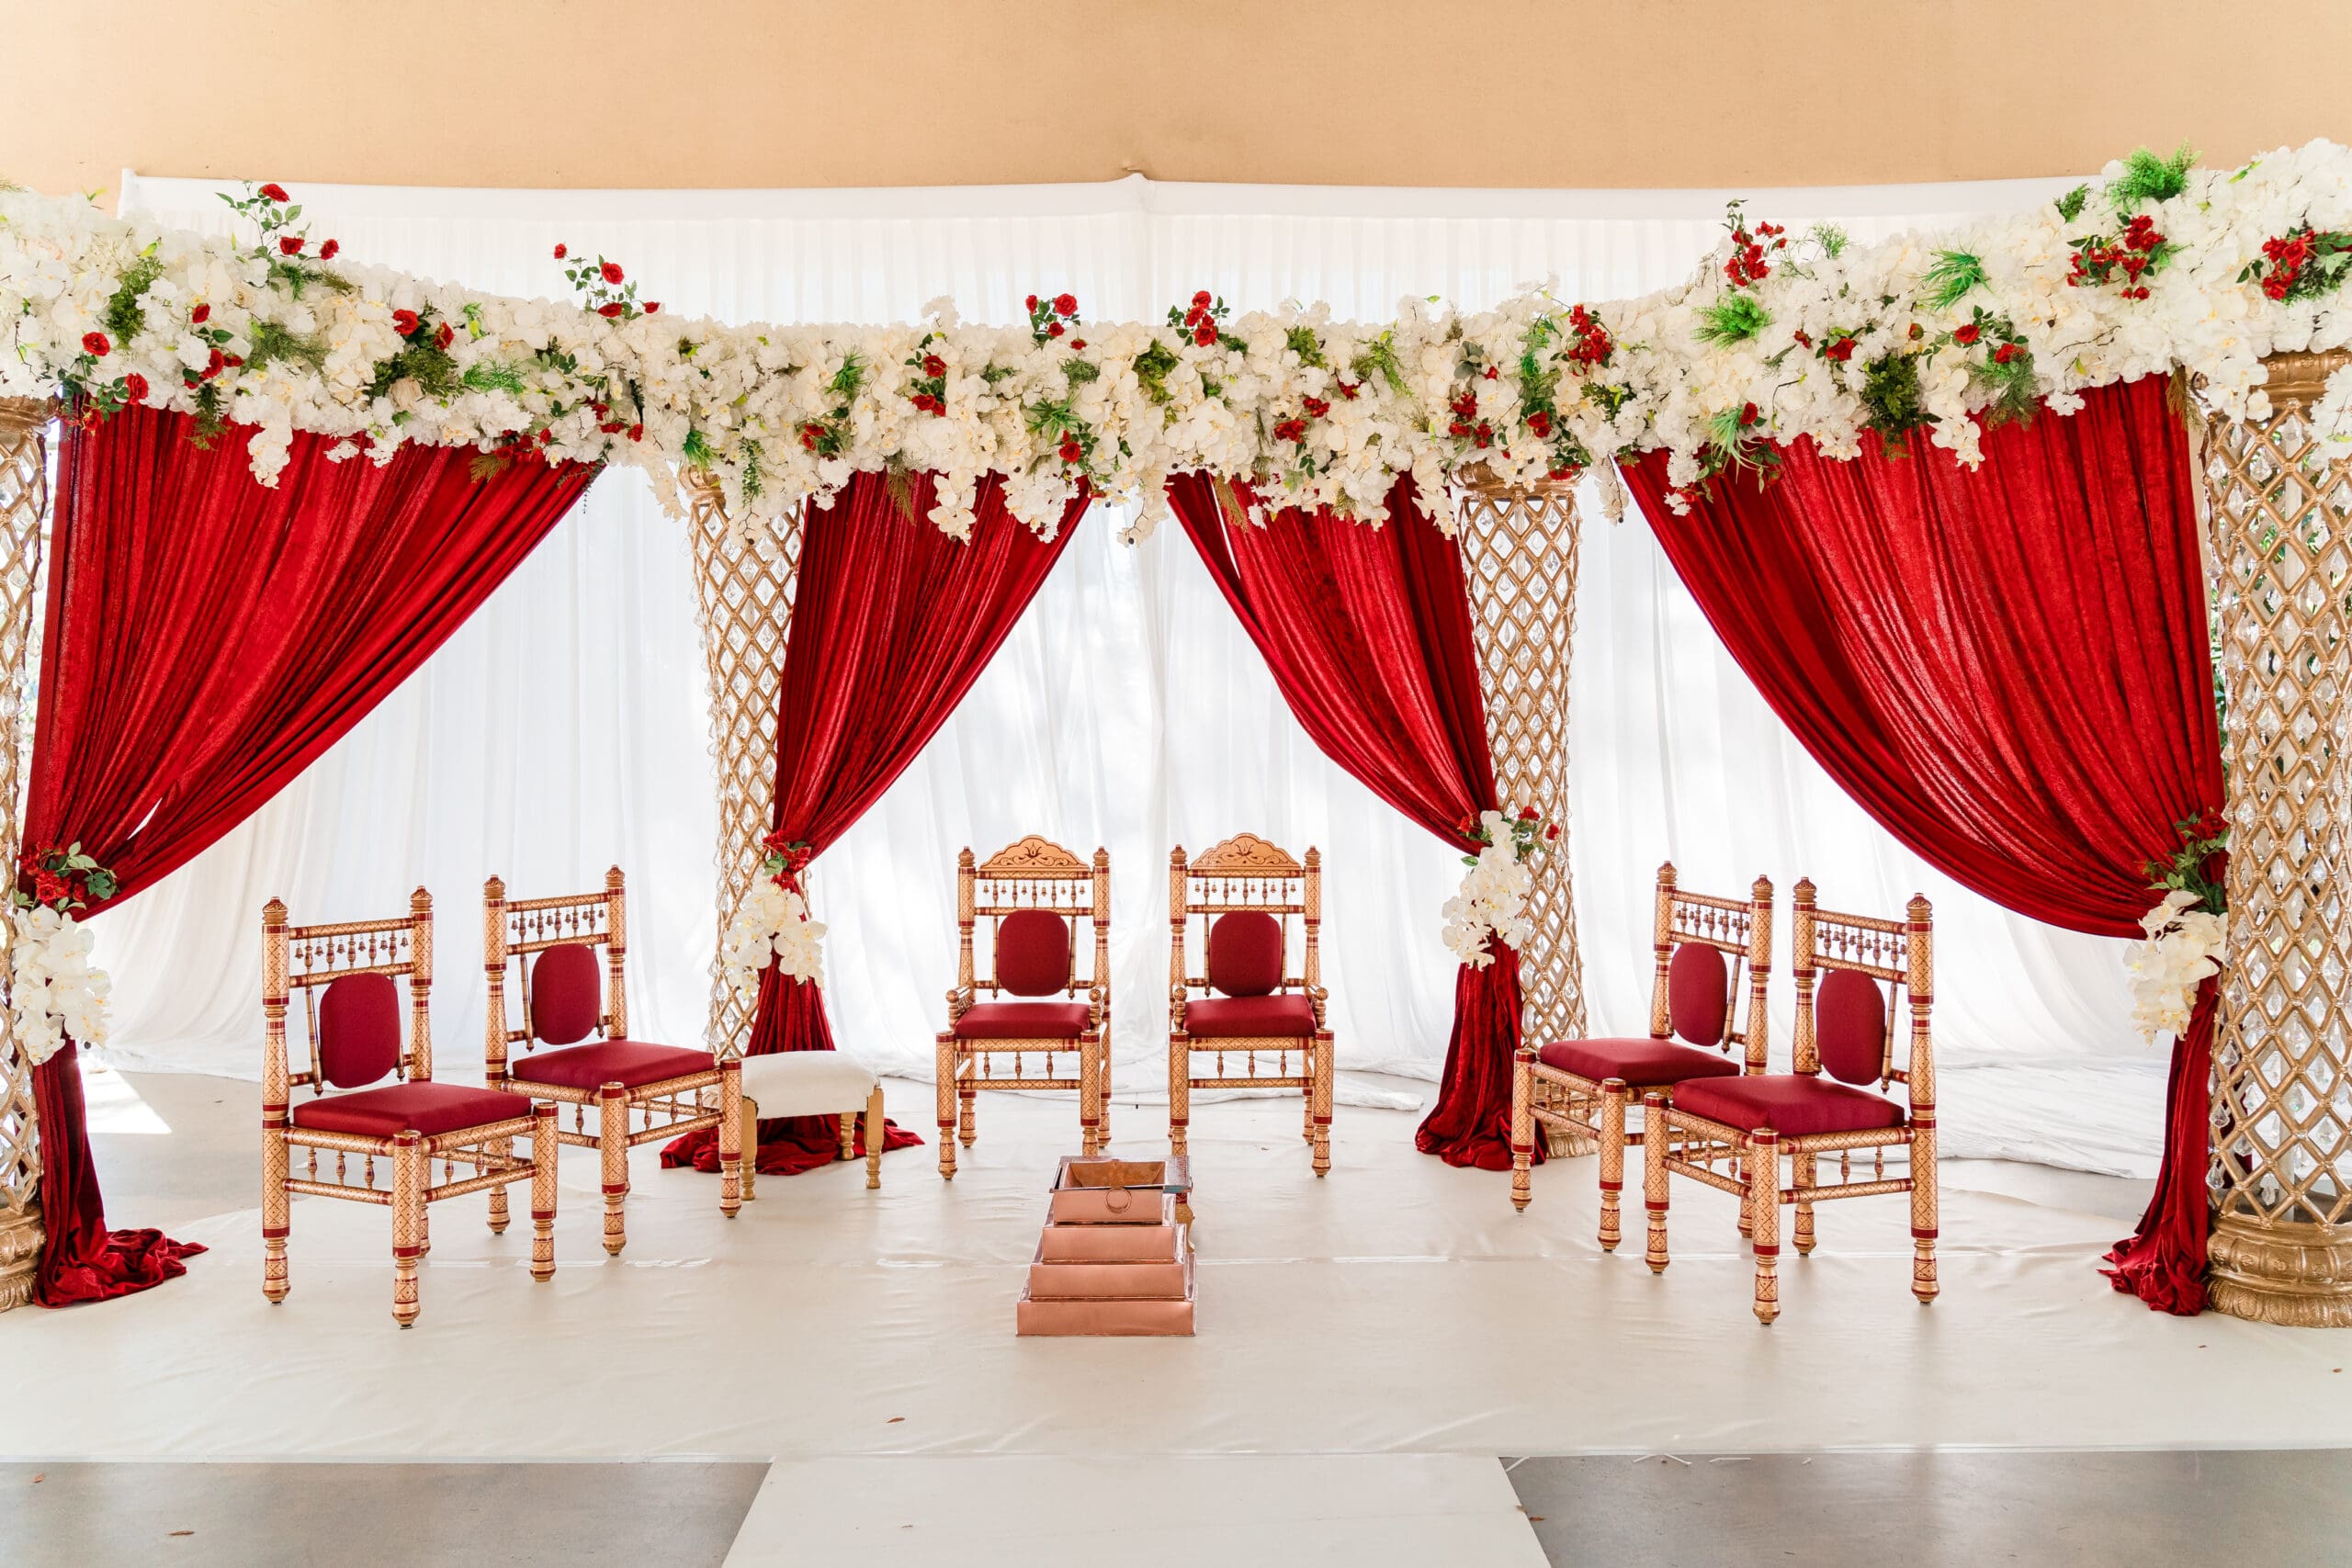 Traditional Indian wedding altar with red and gold decorative chairs, red drapes, and white flowers